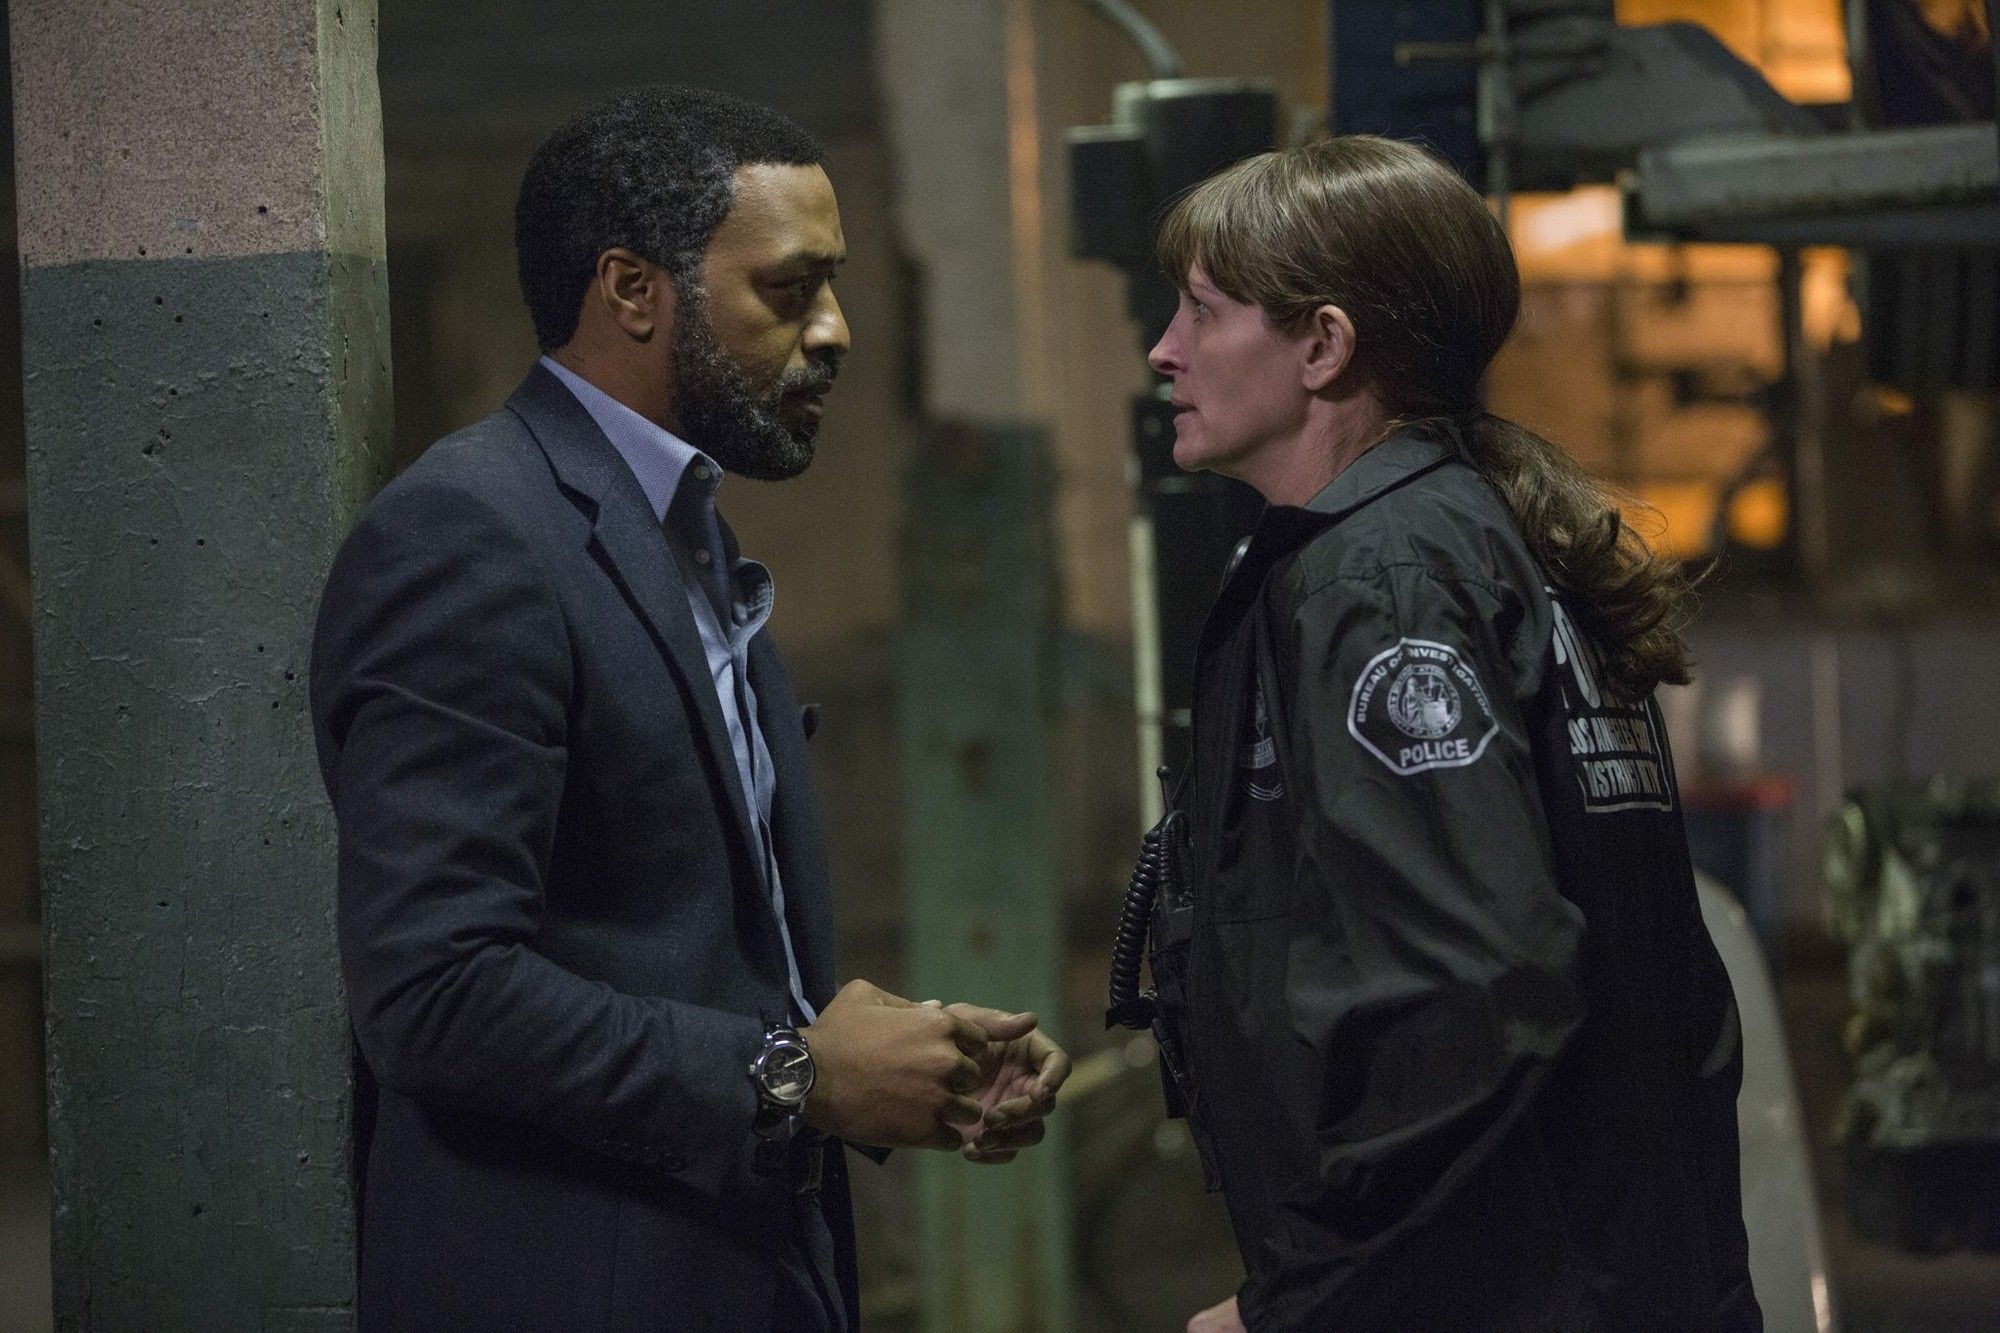 Chiwetel Ejiofor stars as Ray and Julia Roberts stars as Jess in STX Entertainment's Secret in Their Eyes (2015)